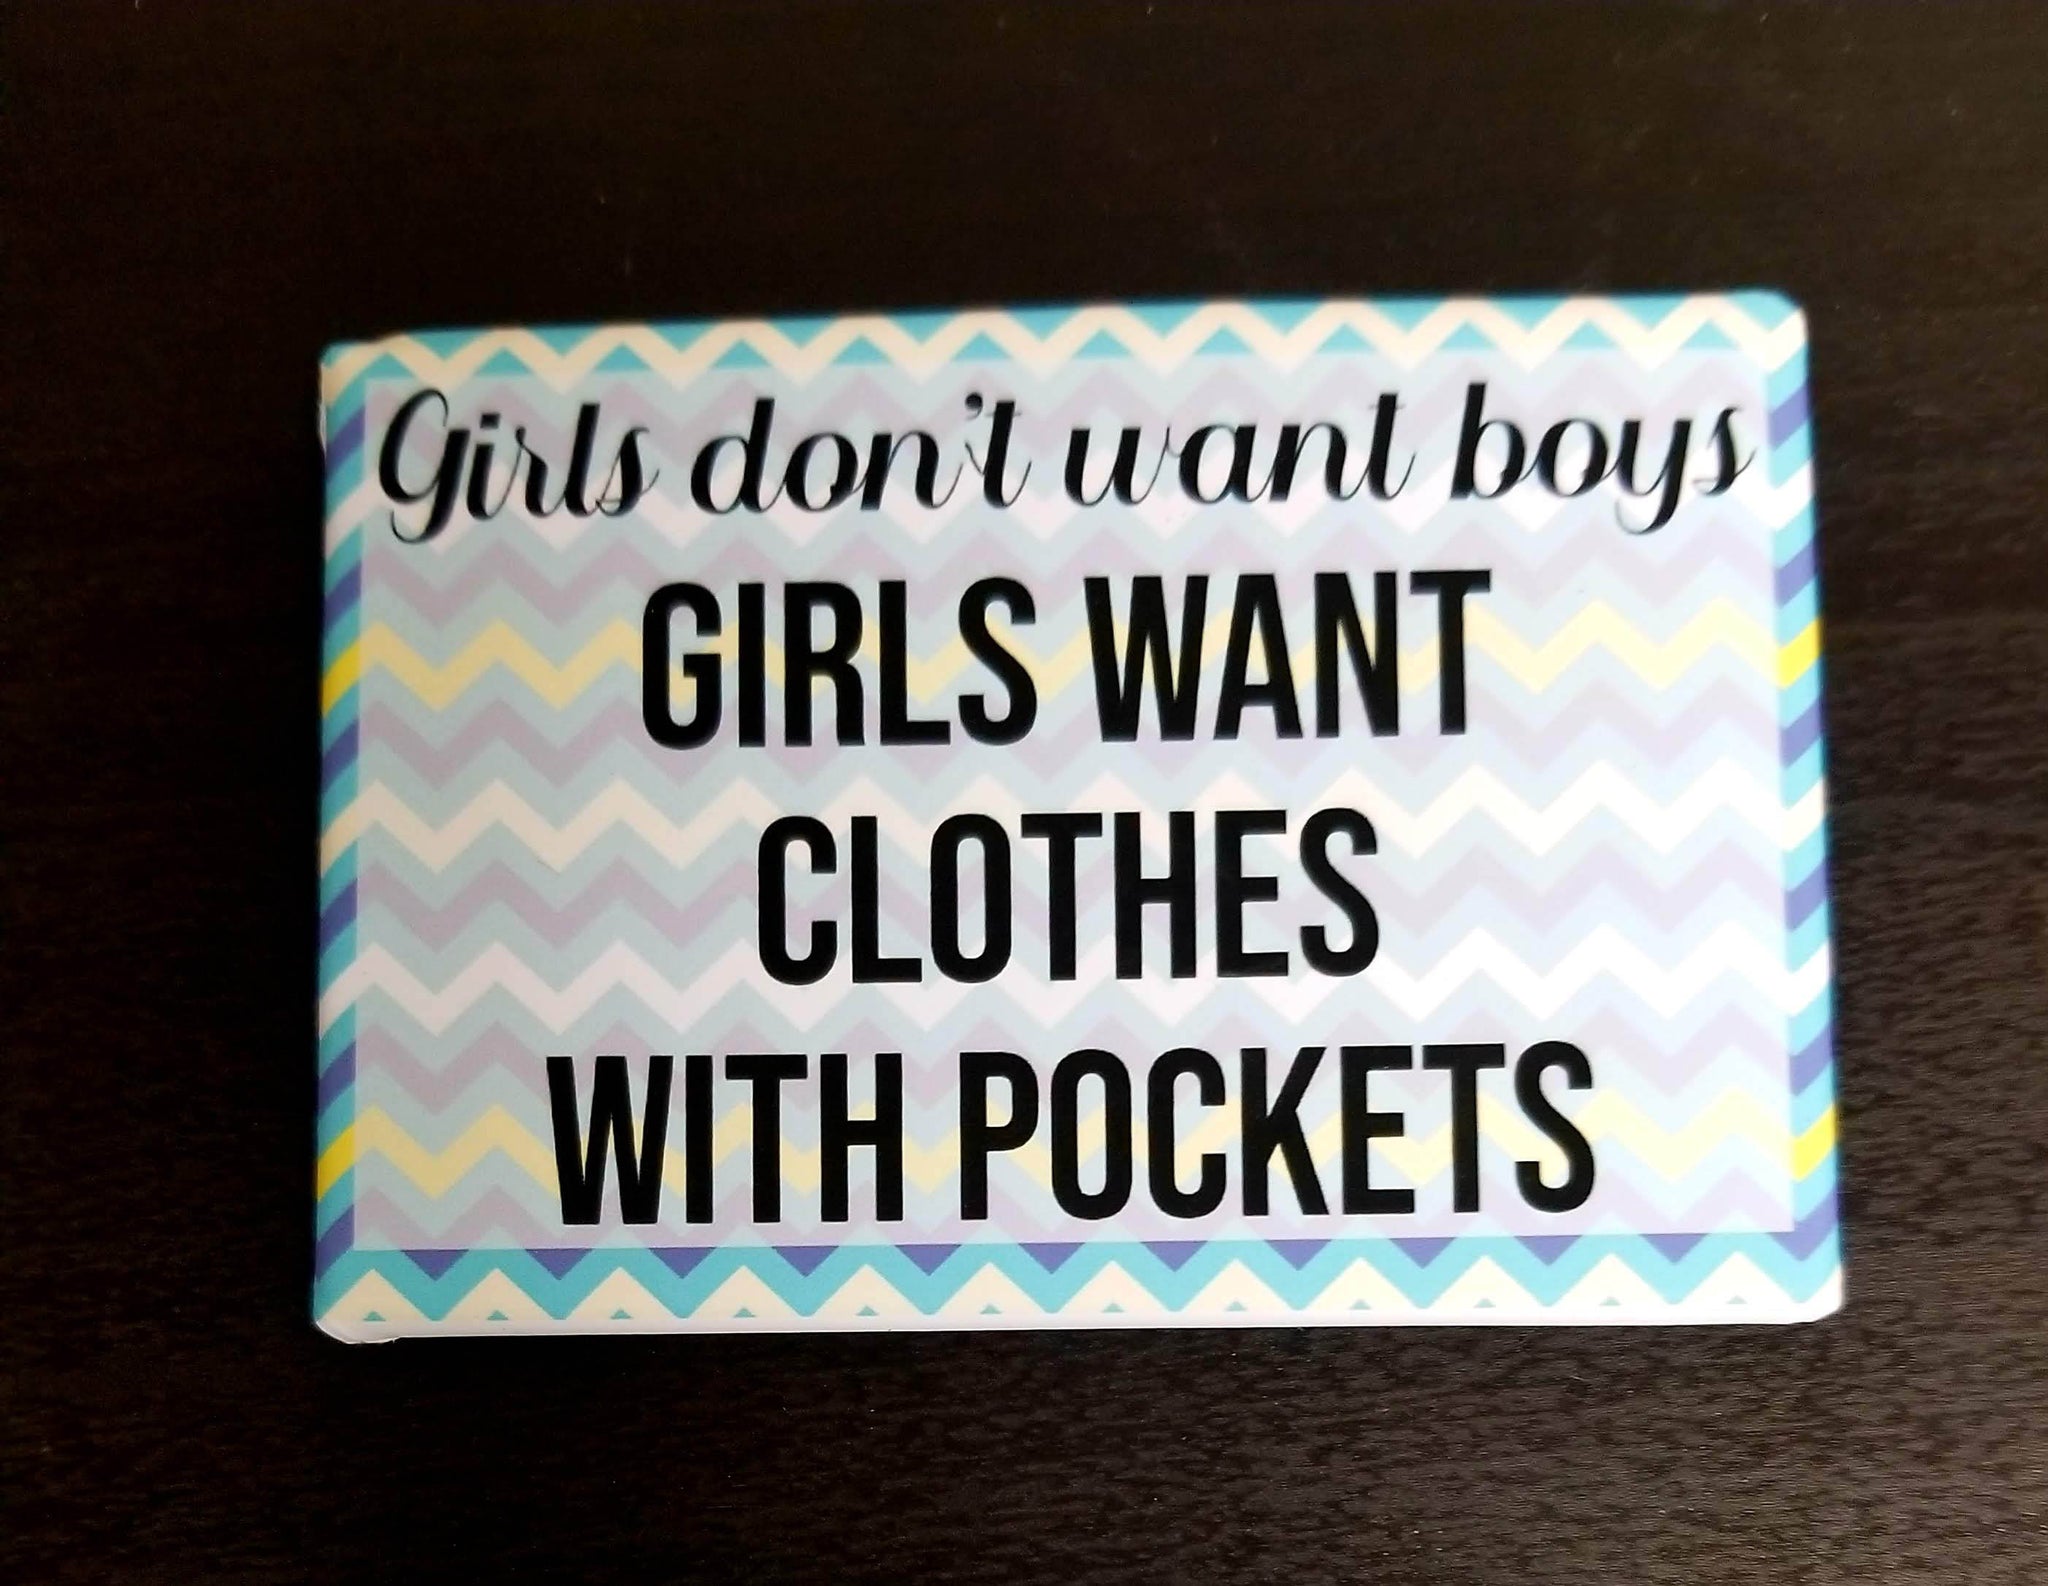 Clothes with pockets feminist  pop culture refrigerator magnet